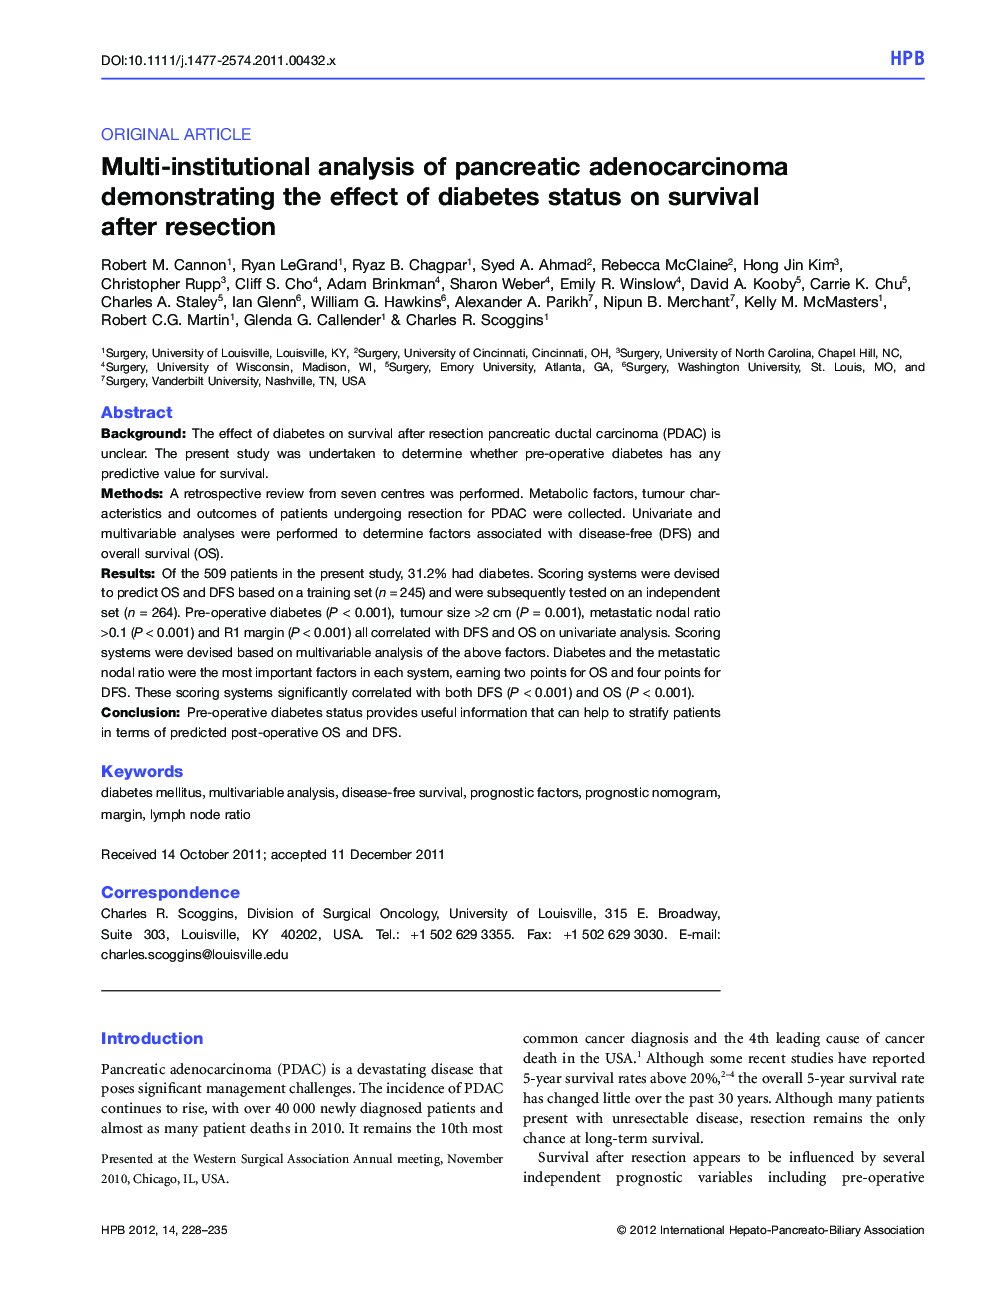 Multi-institutional analysis of pancreatic adenocarcinoma demonstrating the effect of diabetes status on survival after resection